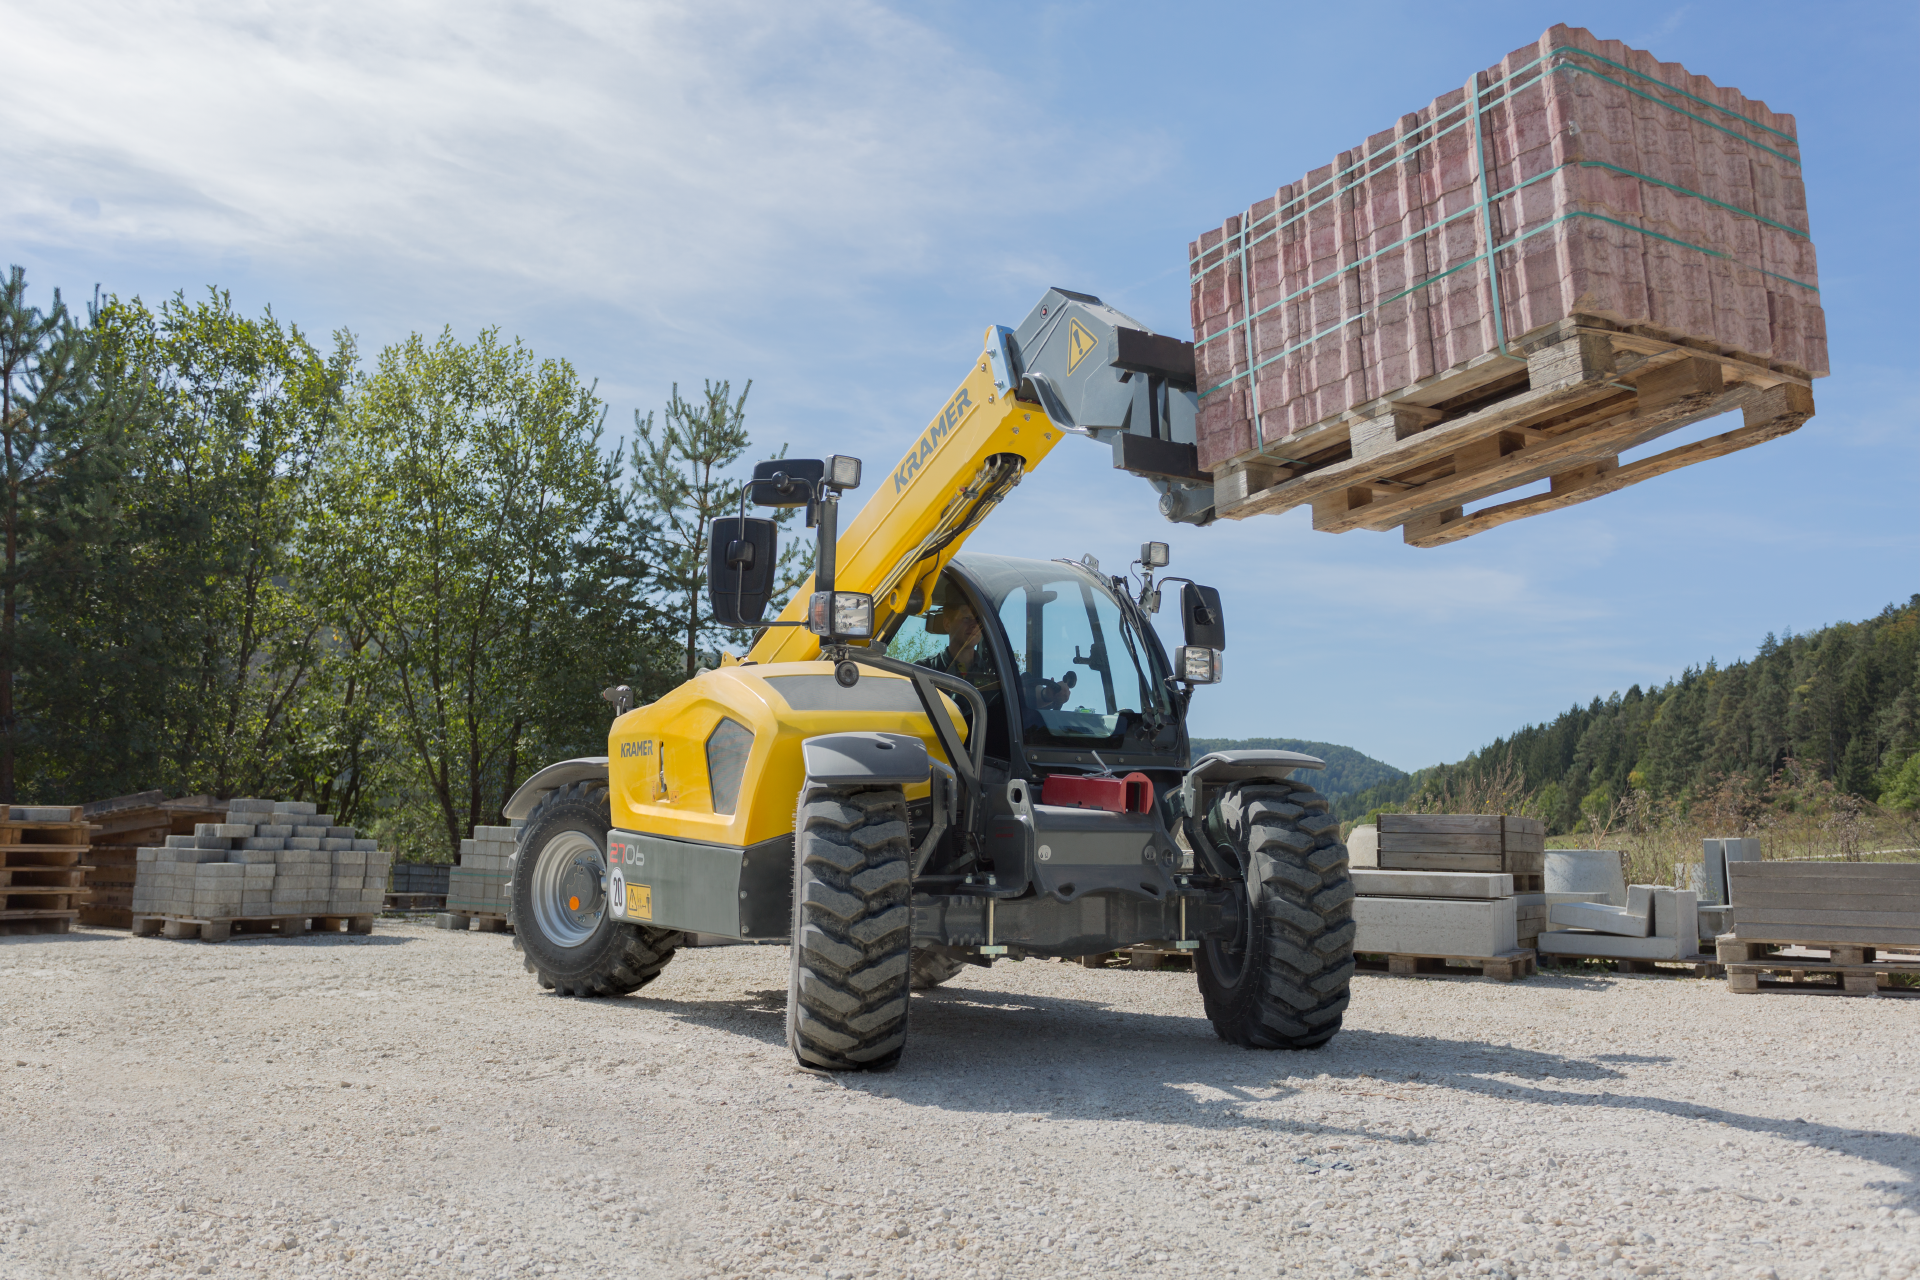 The efficient compact genius 2706 while transporting a stone pallet.